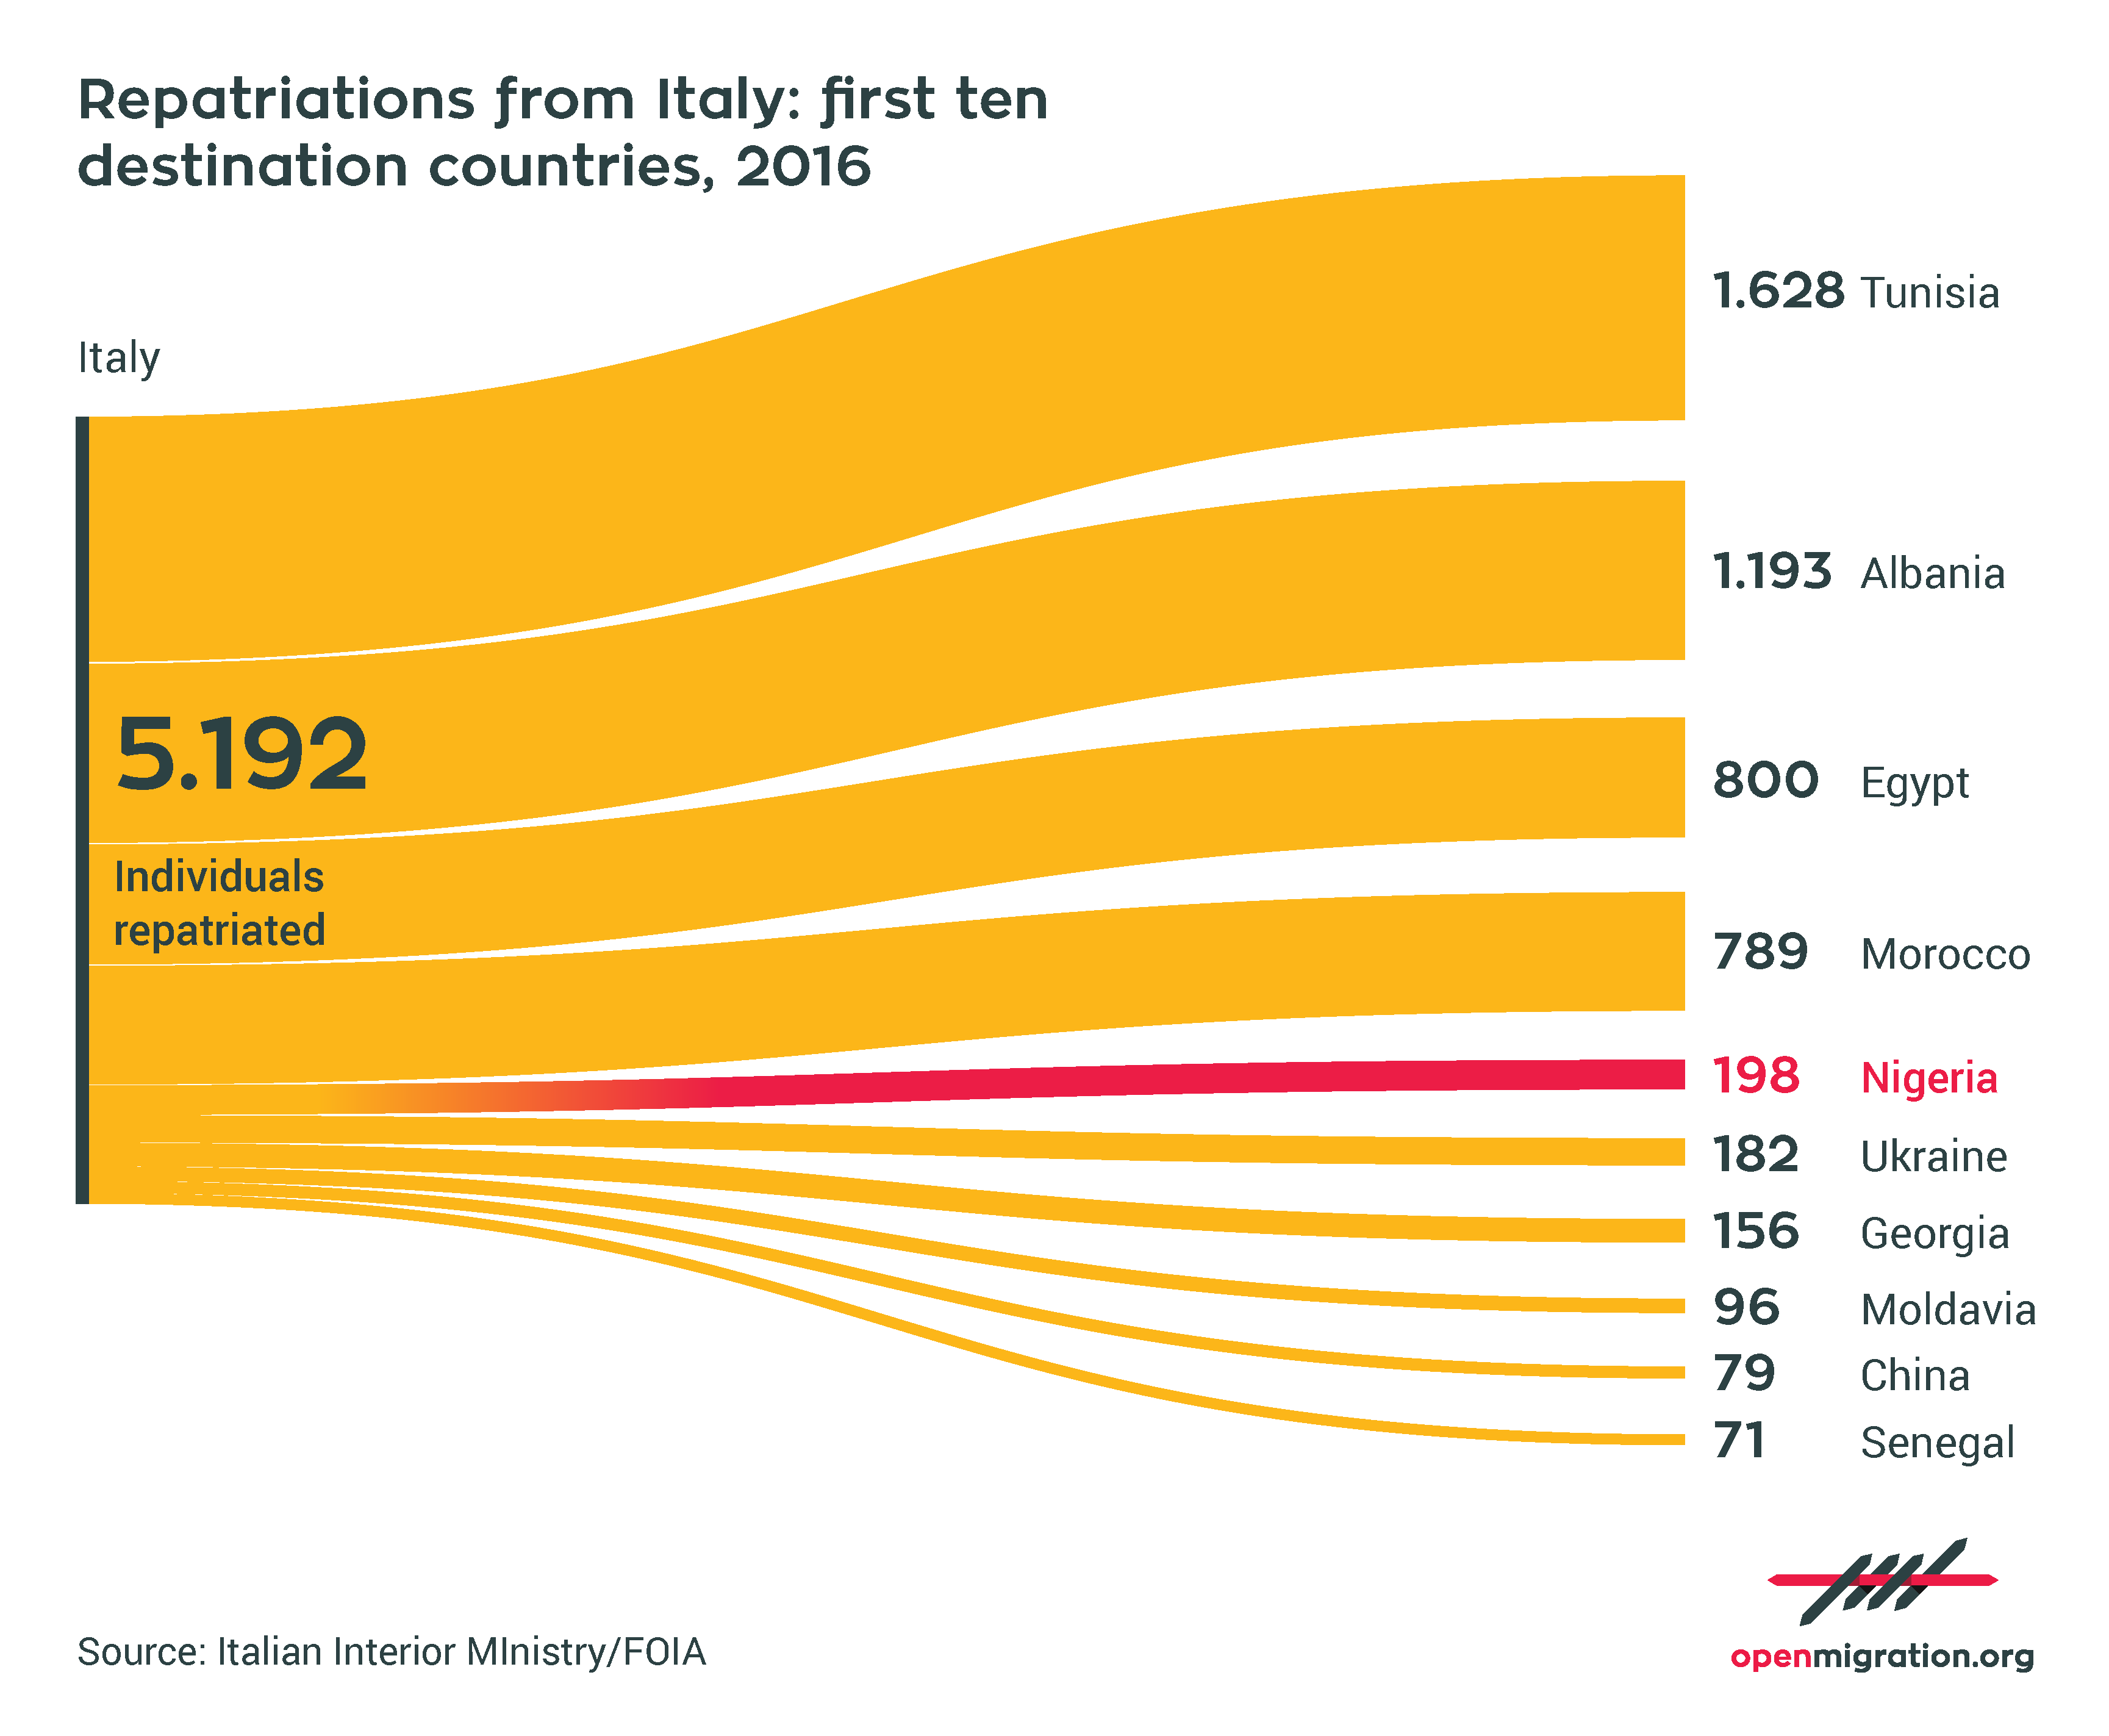 Repatriations from Italy: first ten destination countries, 2016